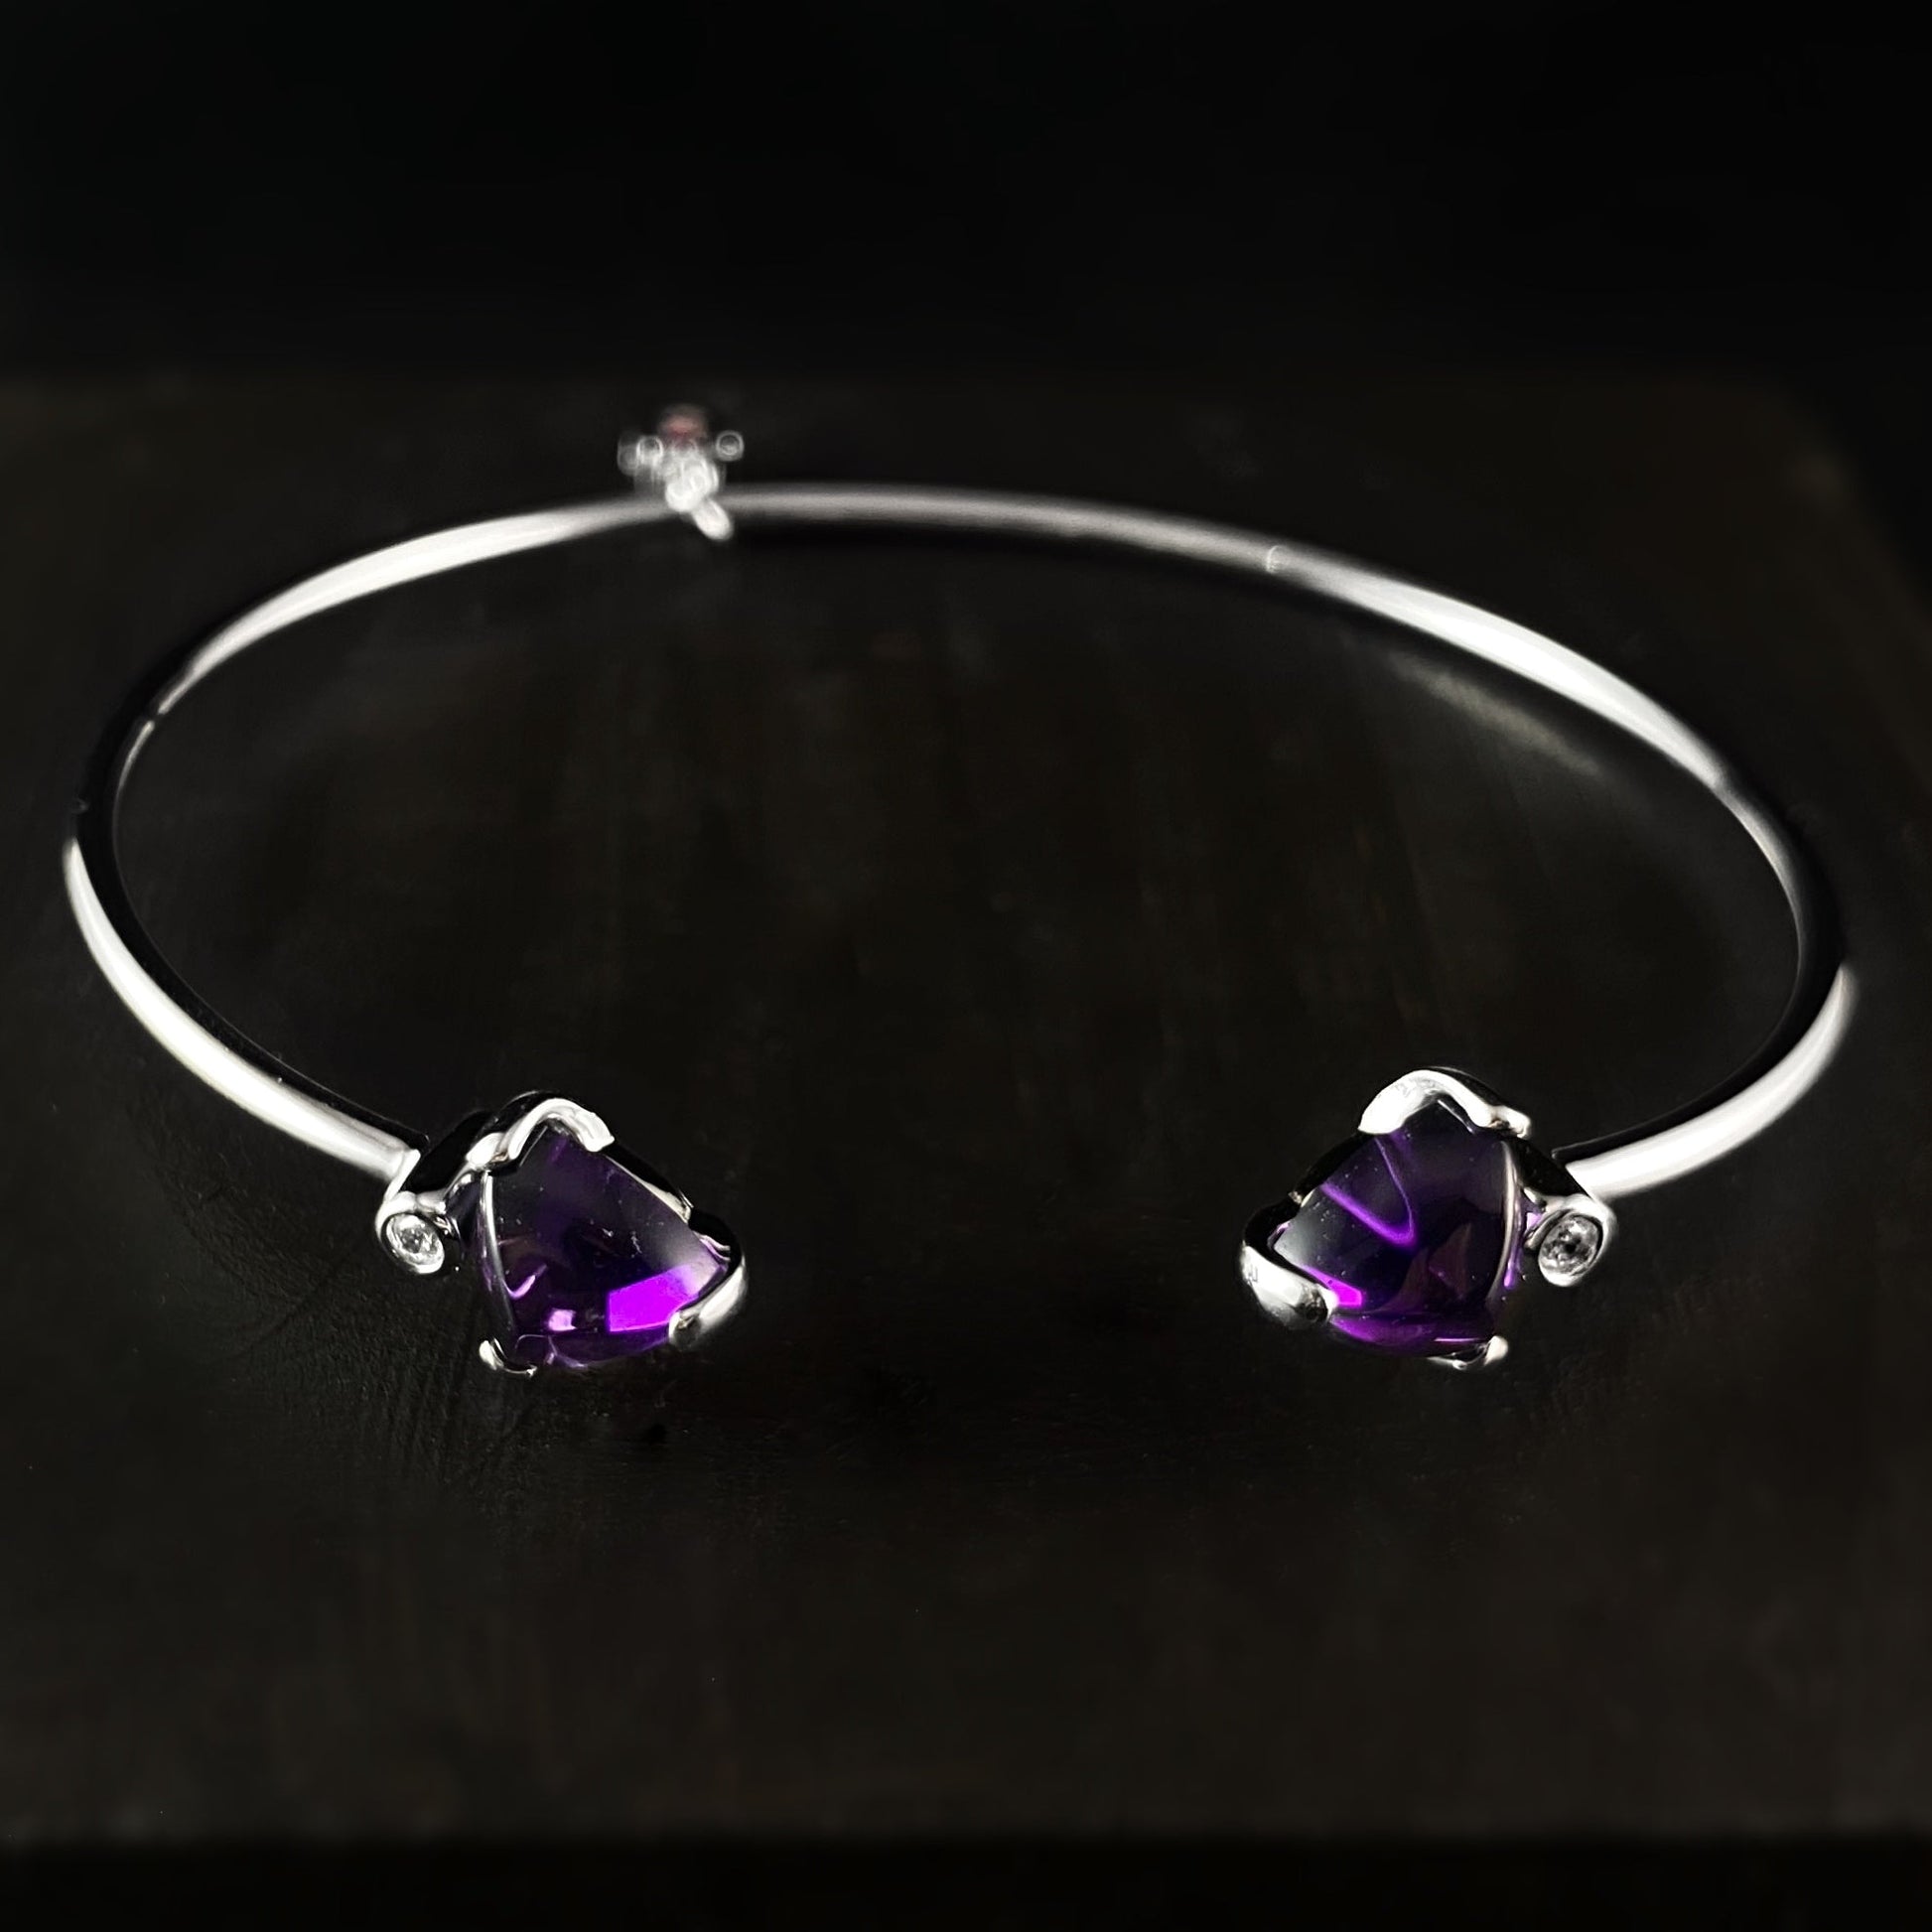 925 Sterling Silver Cuff Bracelet with Amethyst Stones -